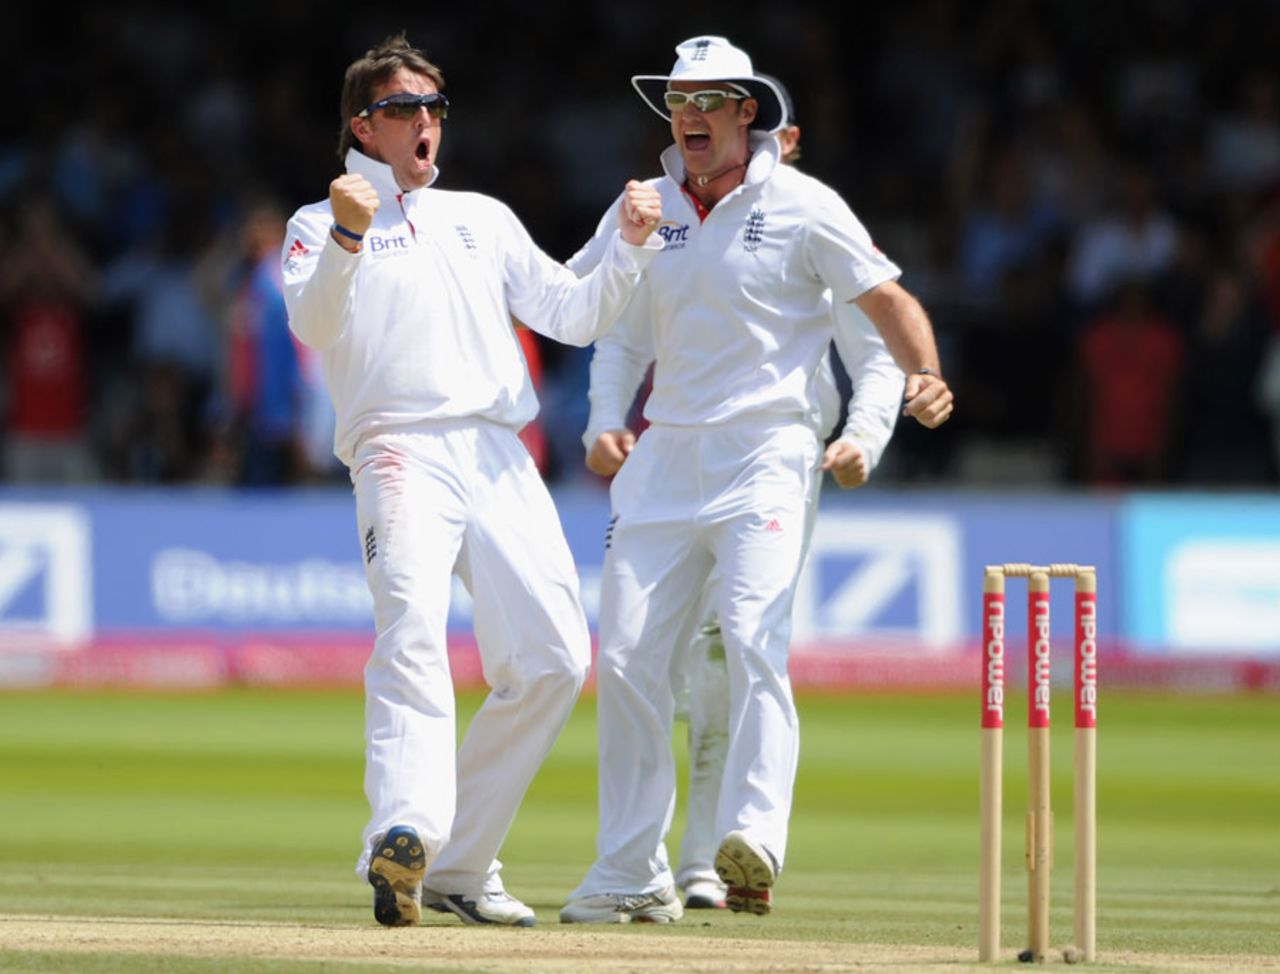 Graeme Swann and Andrew Strauss celebrate Gautam Gambhir's wicket, England v India, 1st Test, Lord's, 5th day, July 25, 2011